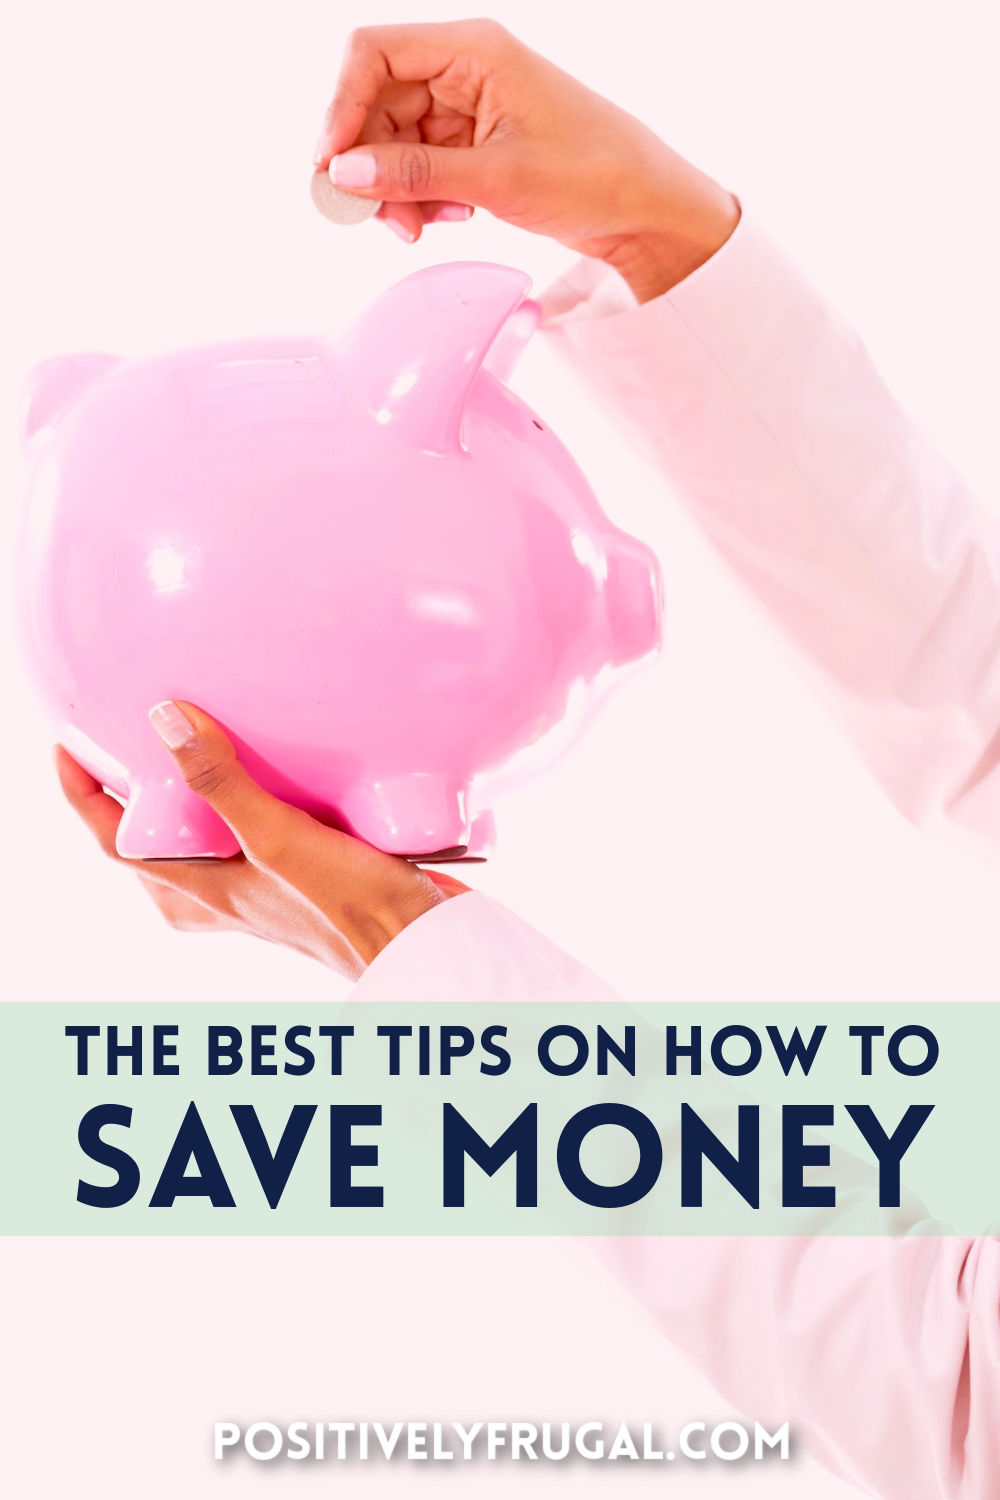 The Best Tips on How To Save Money by PositivelyFrugal.com